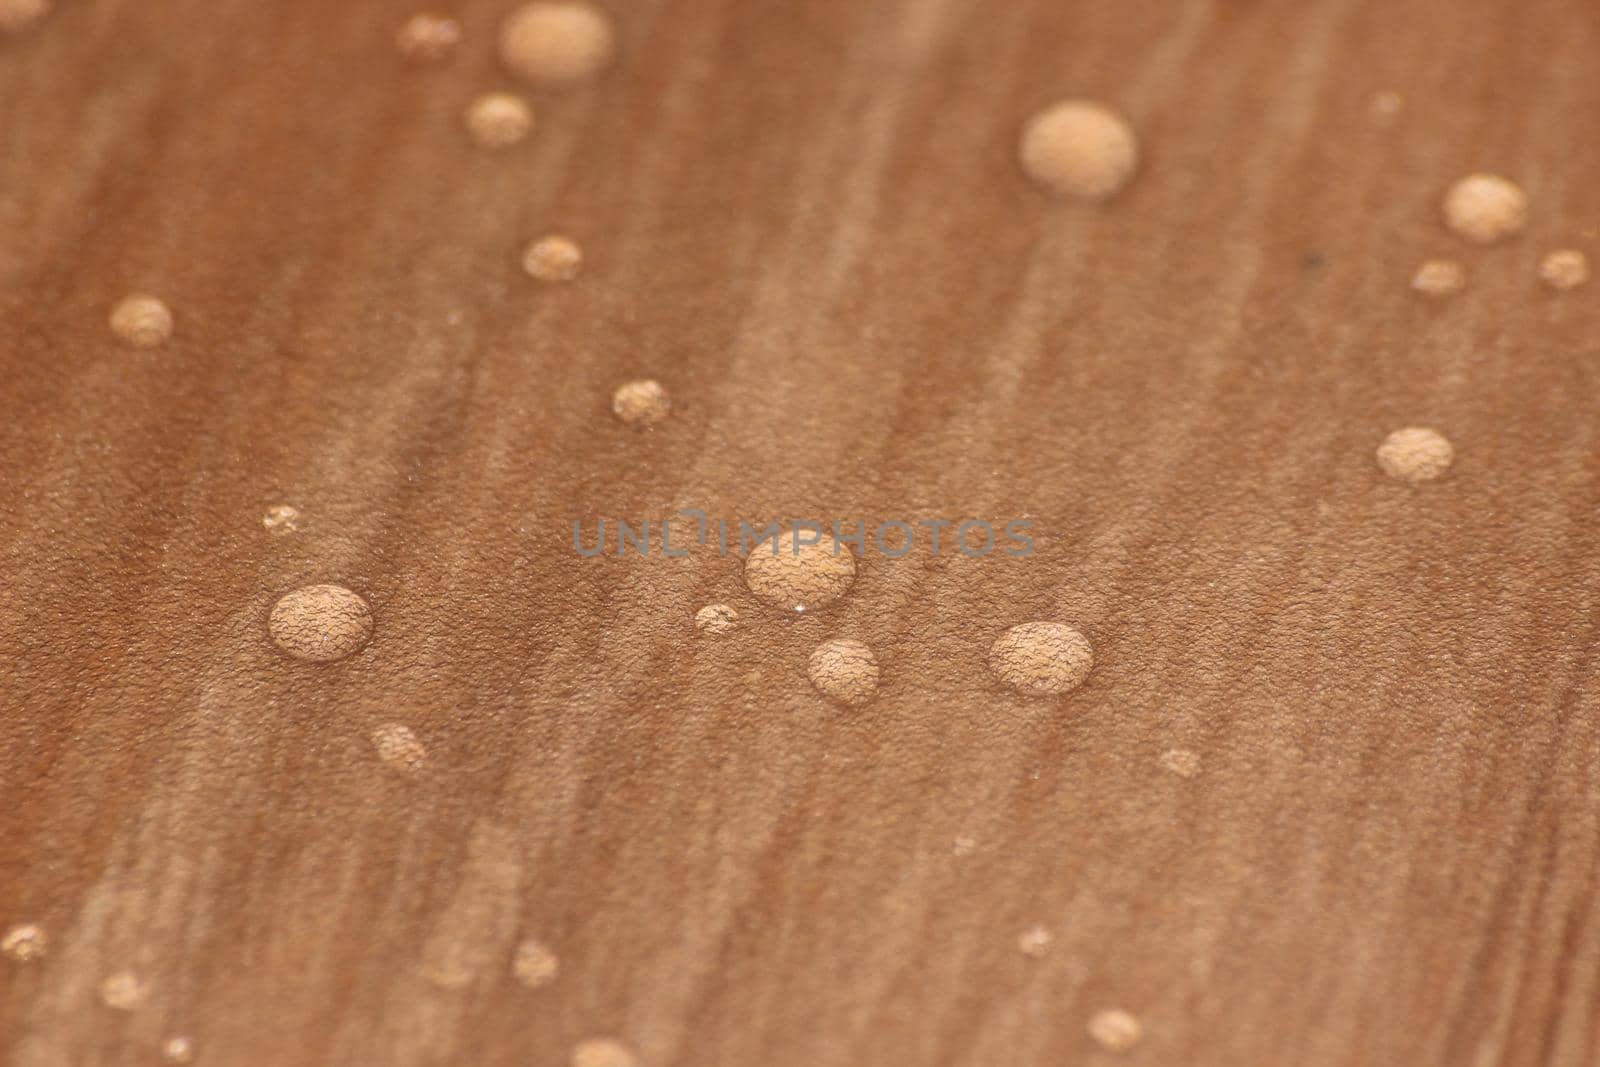 Closeup selective focus view of water drops on wooden floor. Abstract raindrops pattern on wooden board